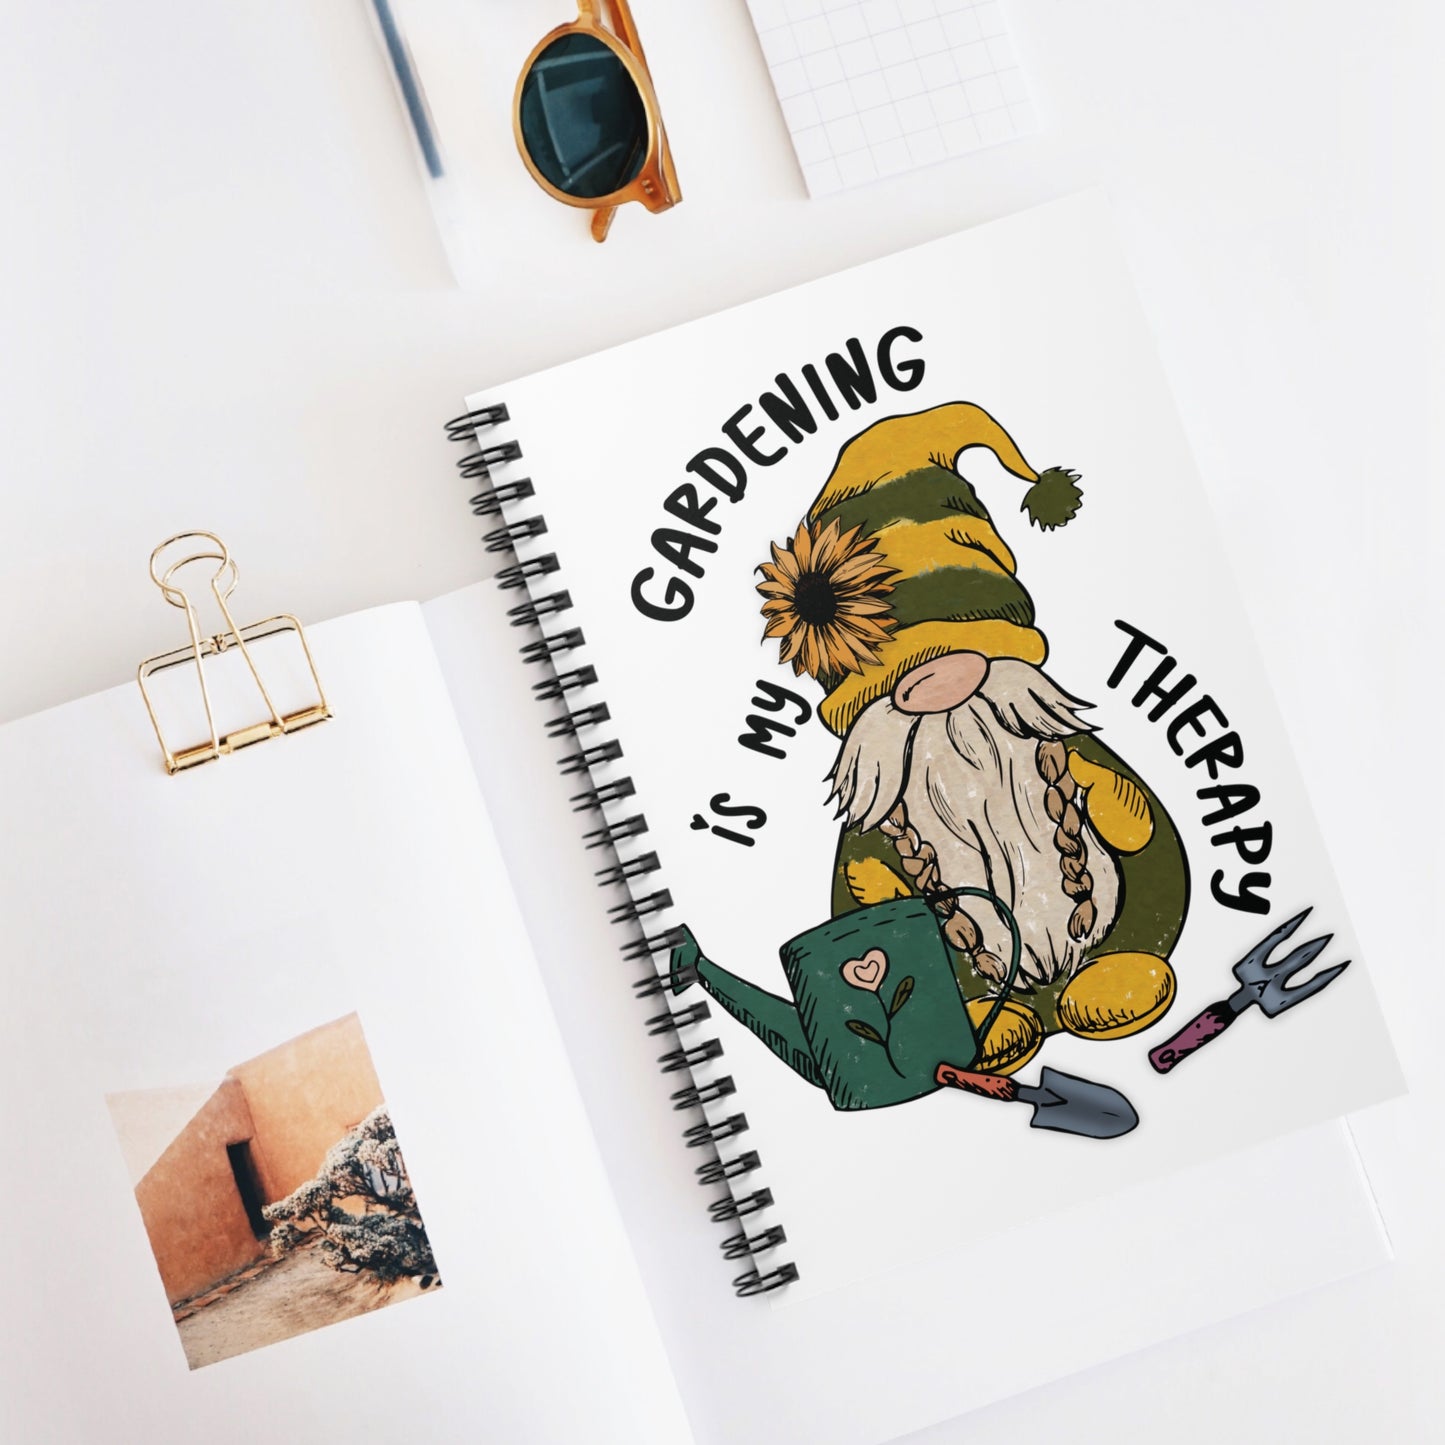 Gardening Therapy: Spiral Notebook - Log Books - Journals - Diaries - and More Custom Printed by TheGlassyLass